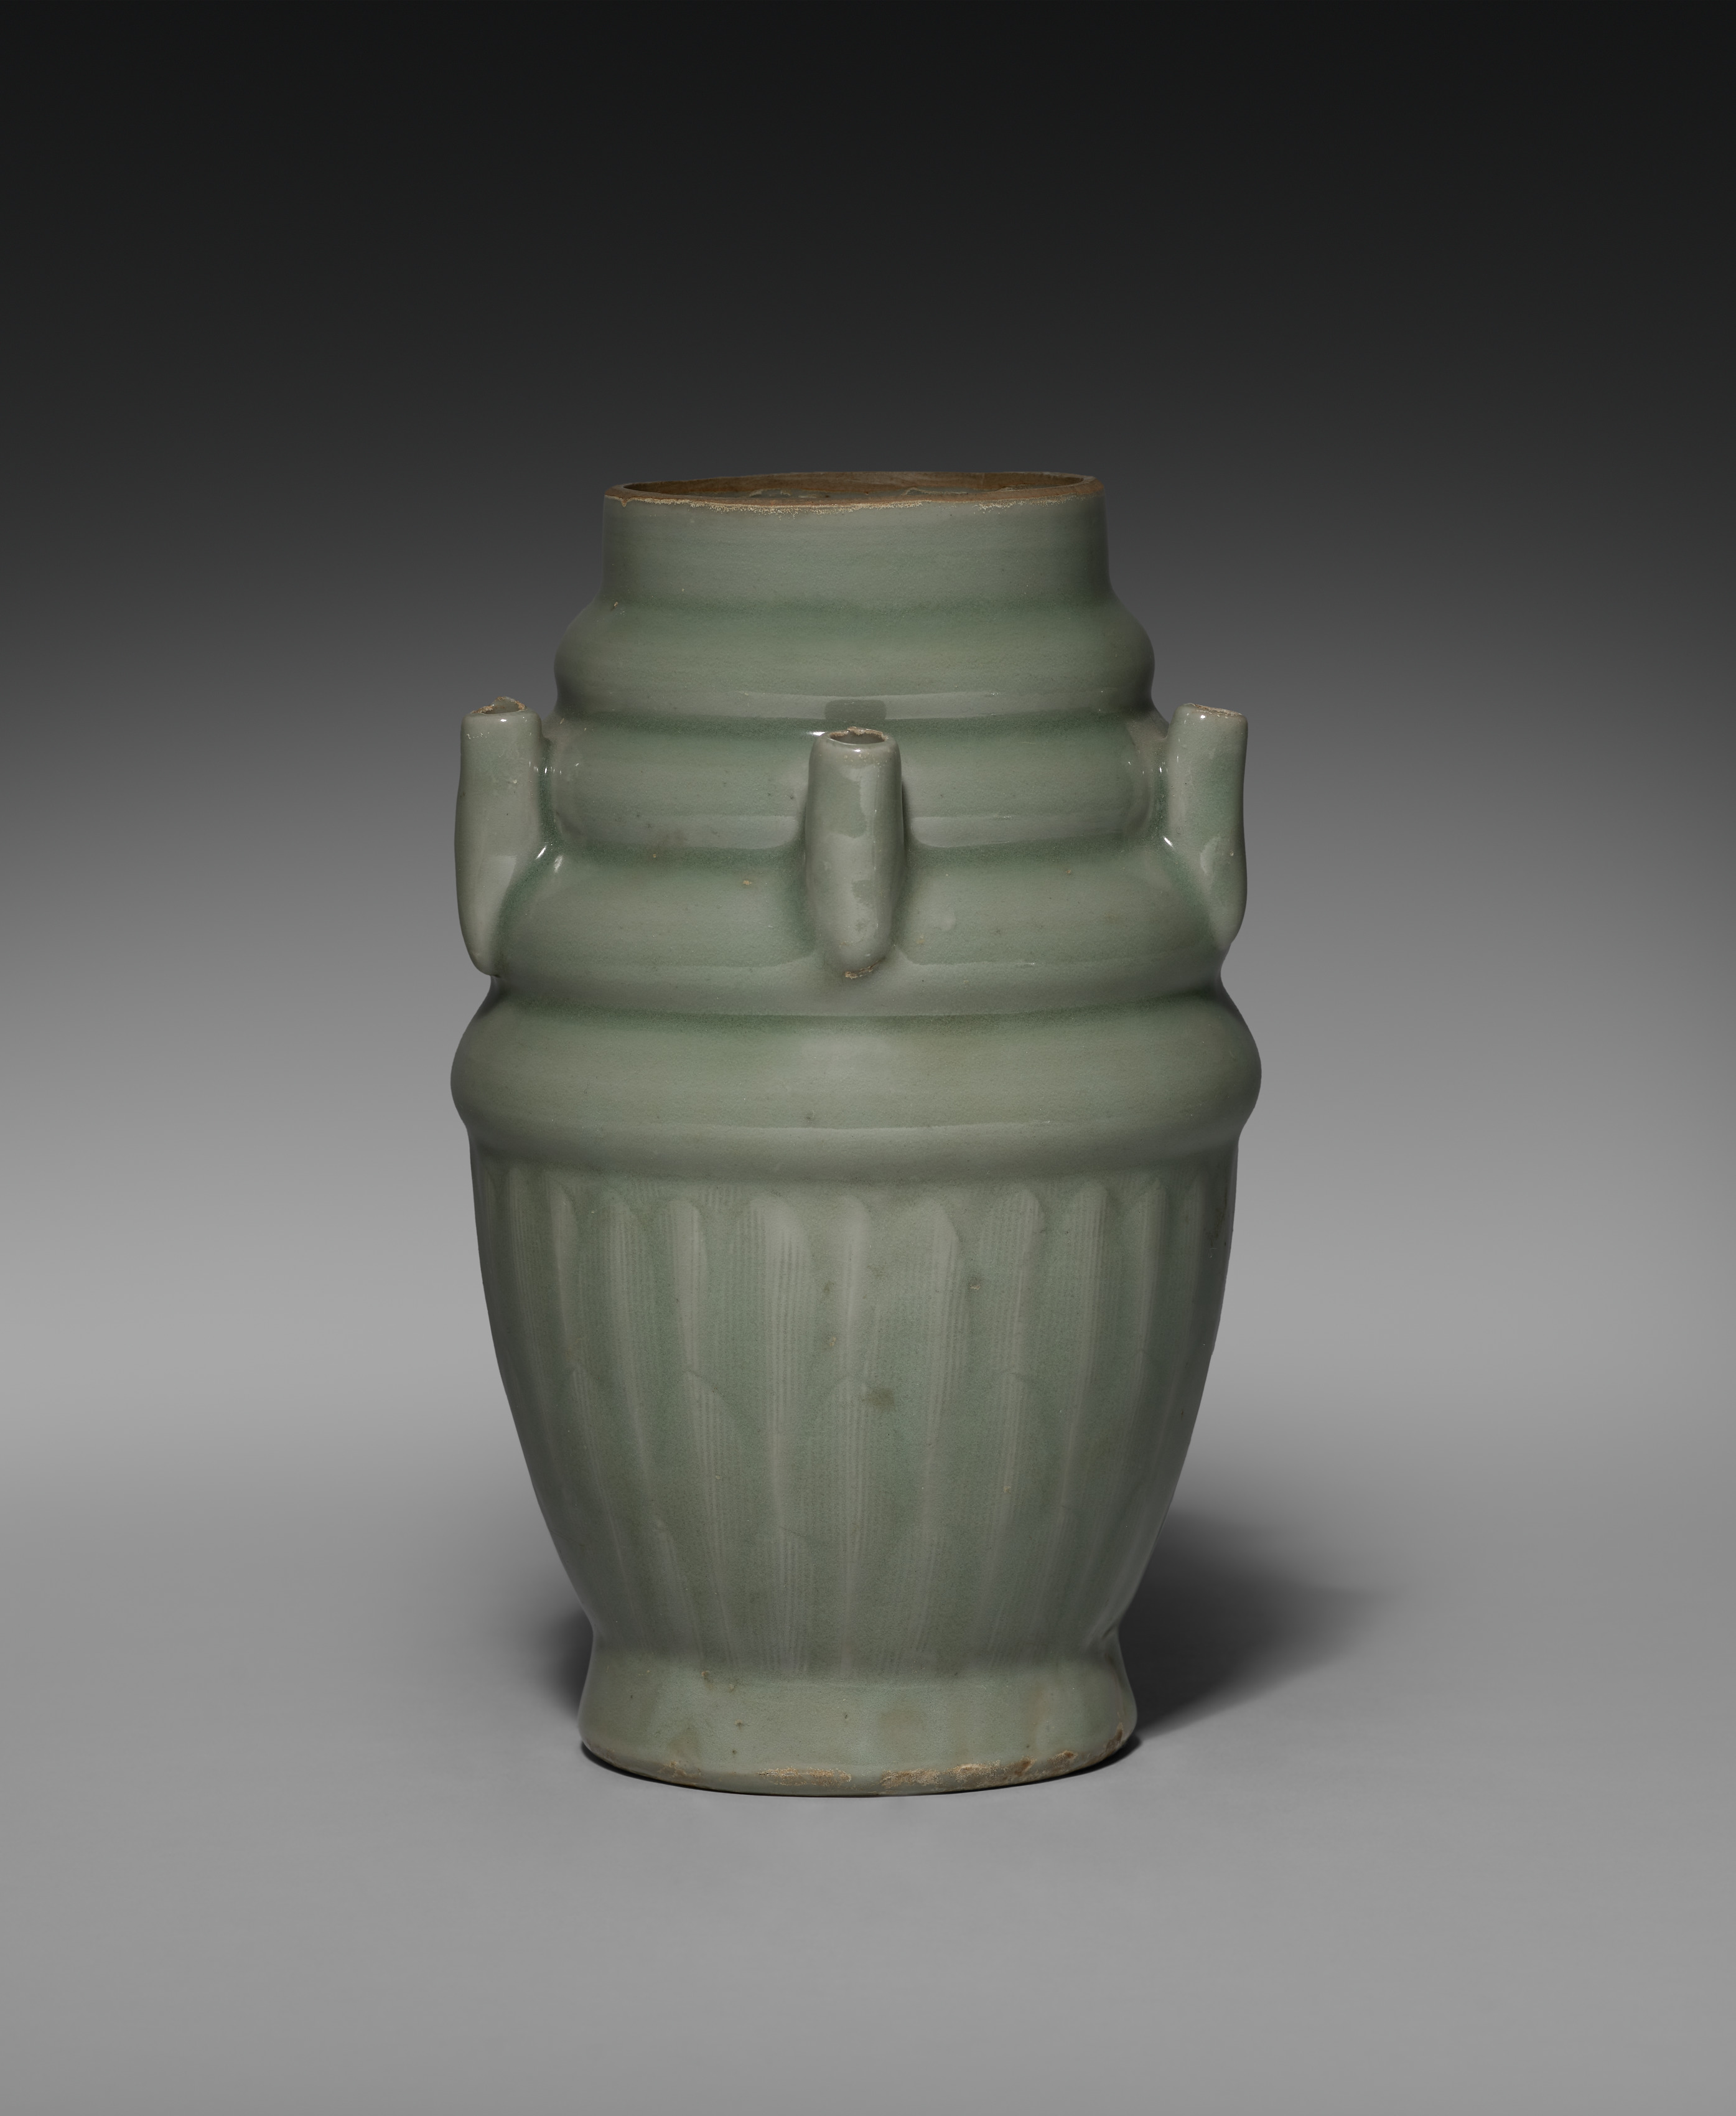 Five-Spouted Vase with Cover